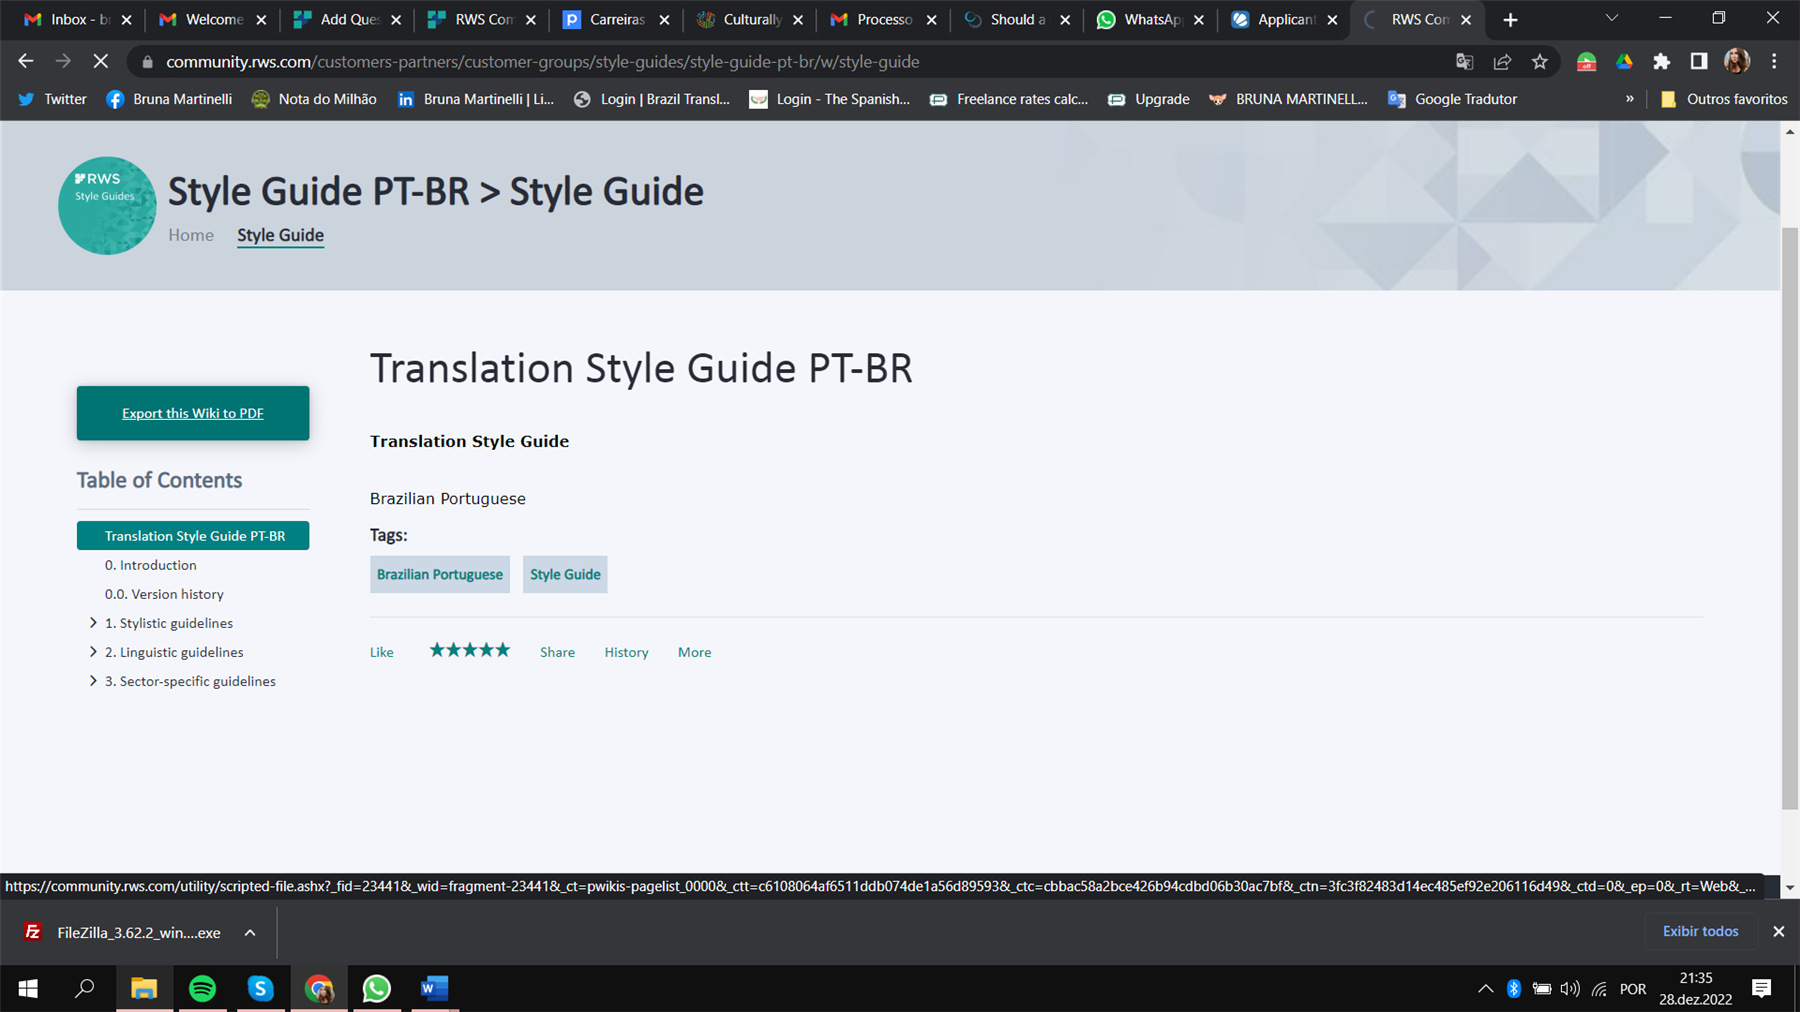 Screenshot of Trados Studio's community page showing the Brazilian Portuguese Style Guide with an 'Export this Wiki to PDF' button.